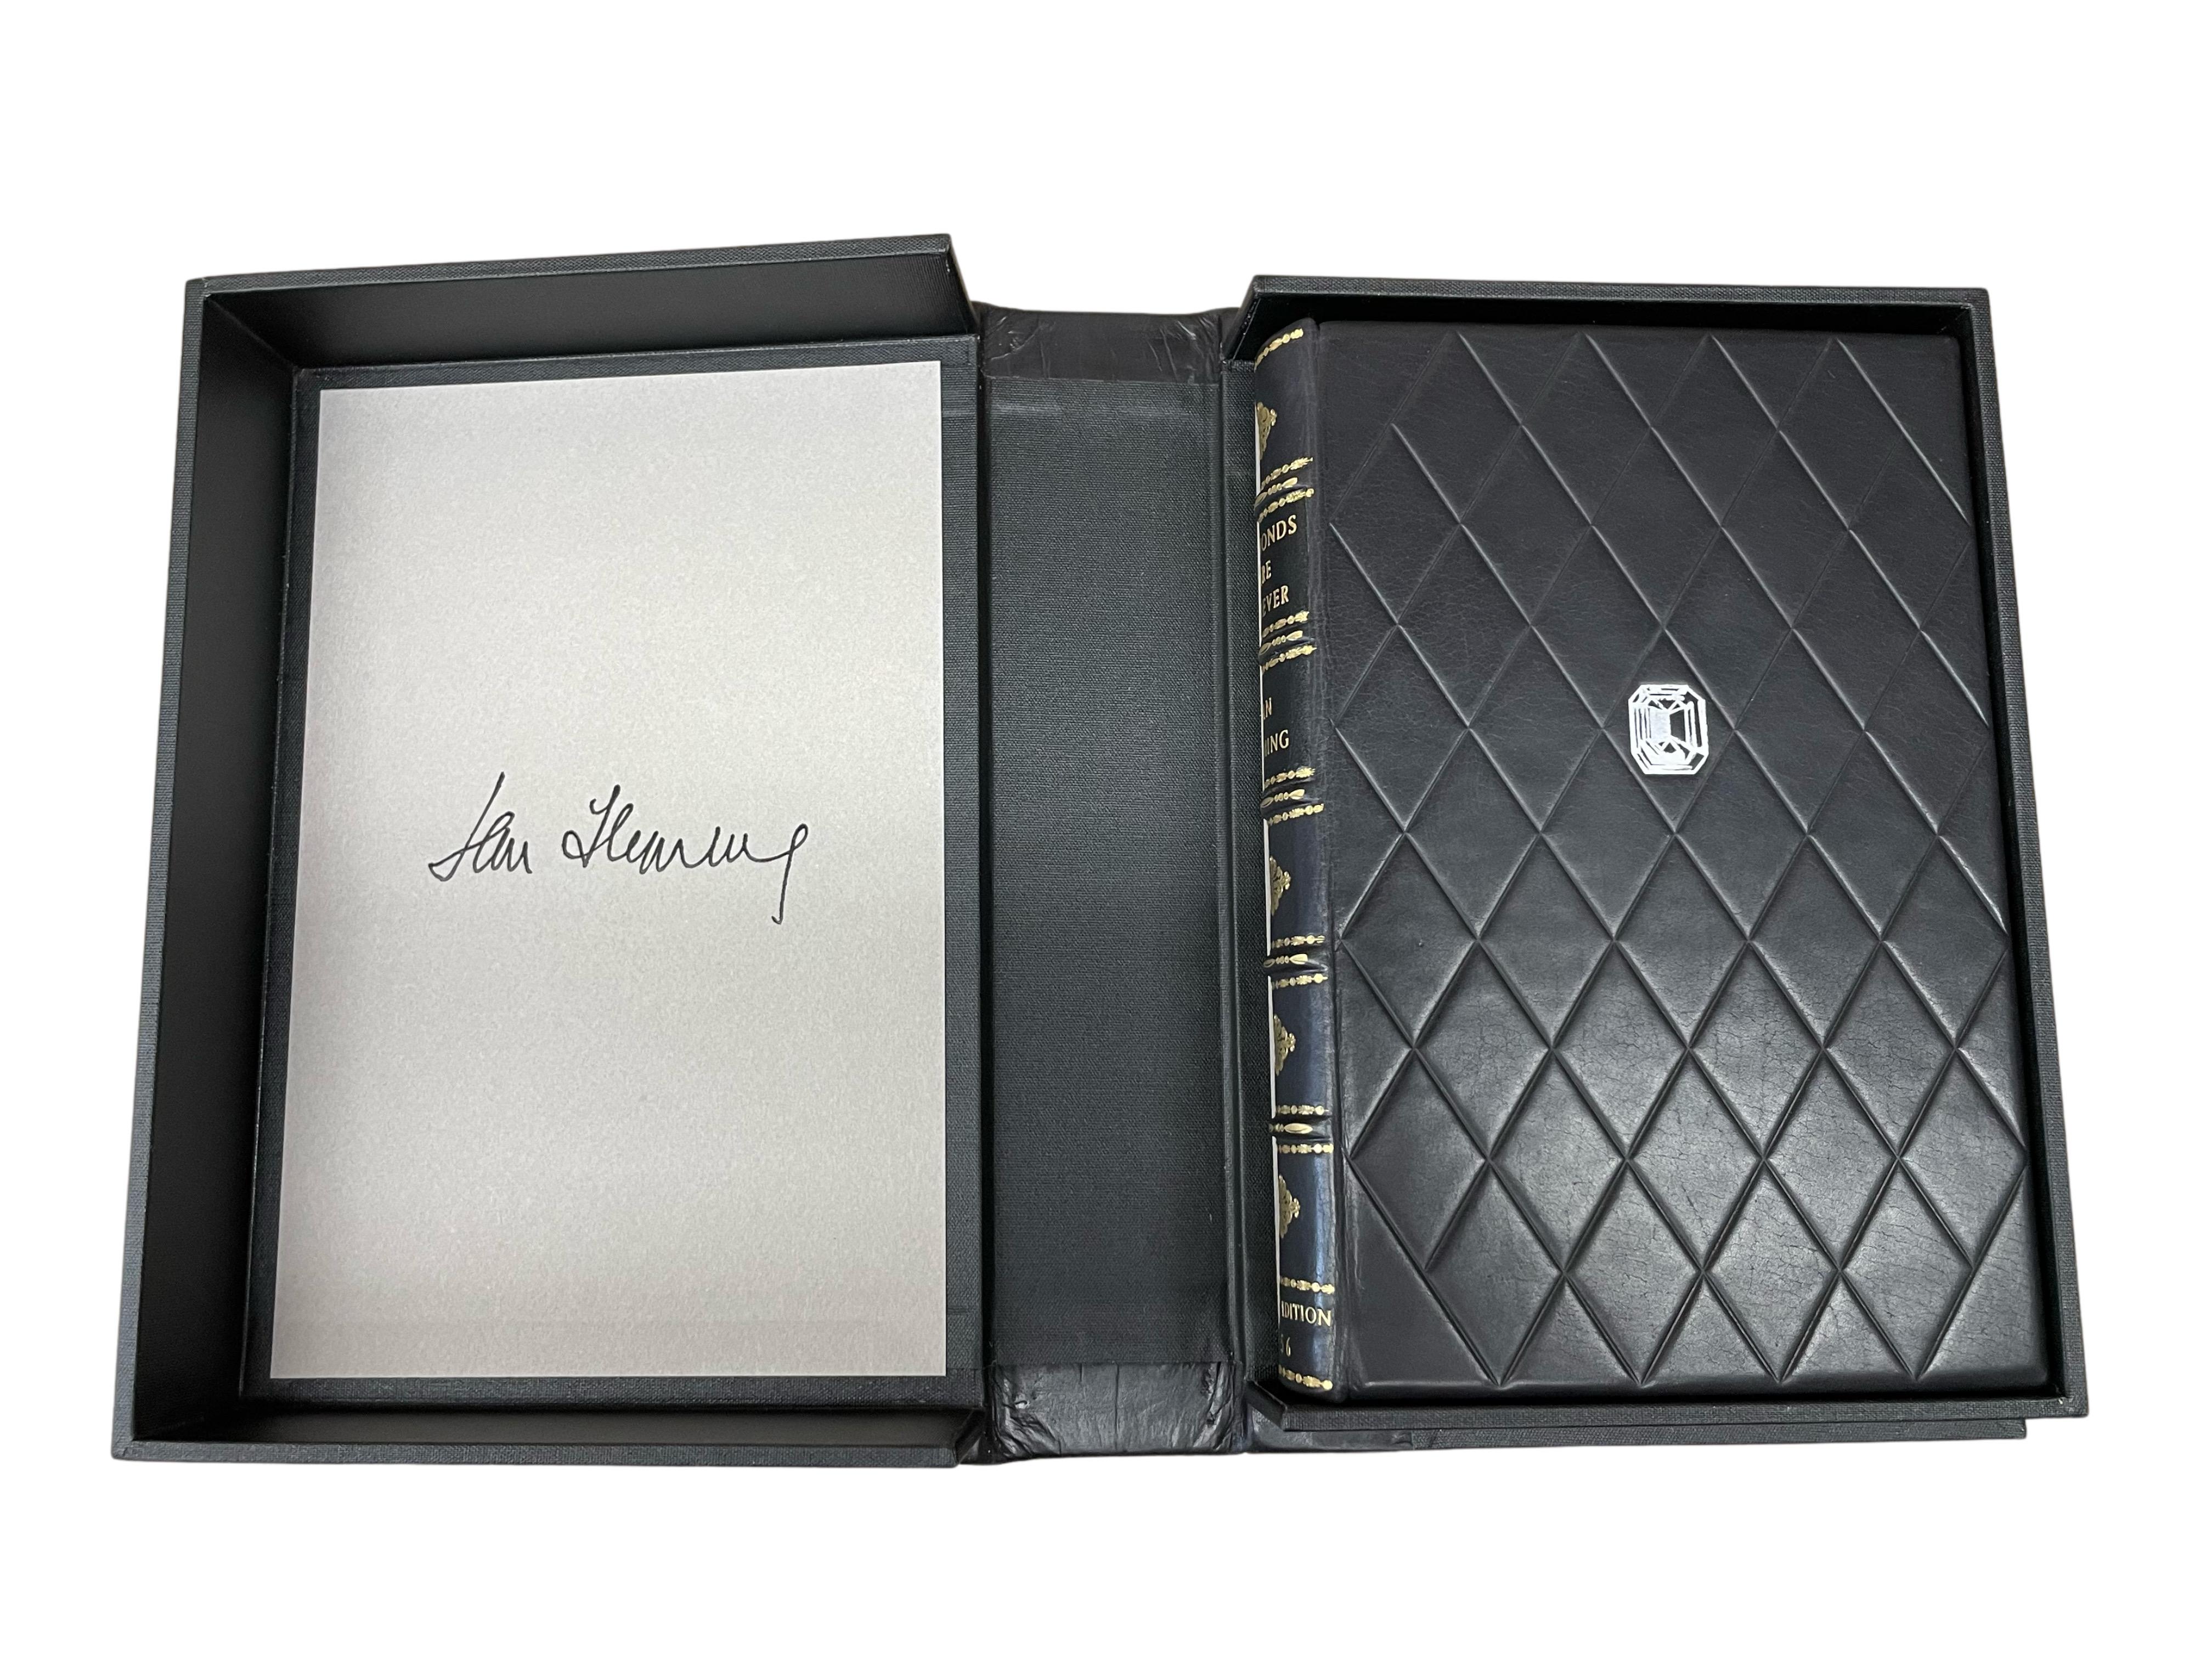 Fleming, Ian. Diamonds are Forever. London: Jonathan Cape, 1956. First edition, first printing. Octavo. Rebound in full black calf leather, with diamond stamped boards, gilt tooling, gilt titles, and raised bands to spine, and a spectacular quarter